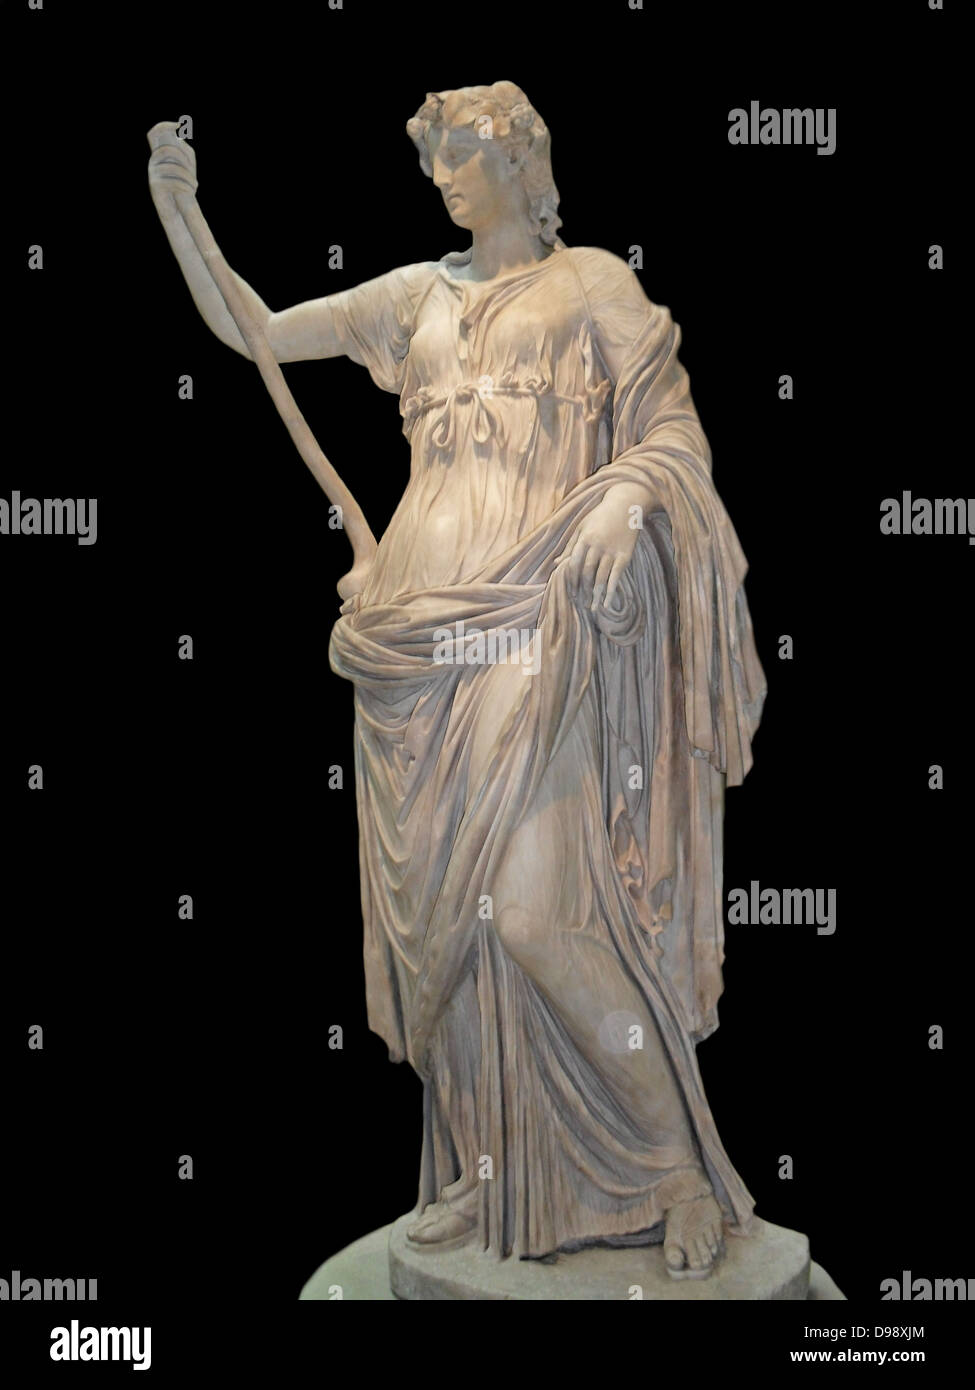 Thalia, Muse of Comedy.  Roman, 2nd century AD. Marble. In ancient mythology, Thalia was one of the nine Muses.  The Muses were female companions of the god Apollo and devoted to the arts and sciences.  Although Thalia was associated with comedy, Roman poets describe her as graceful and tender. Stock Photo